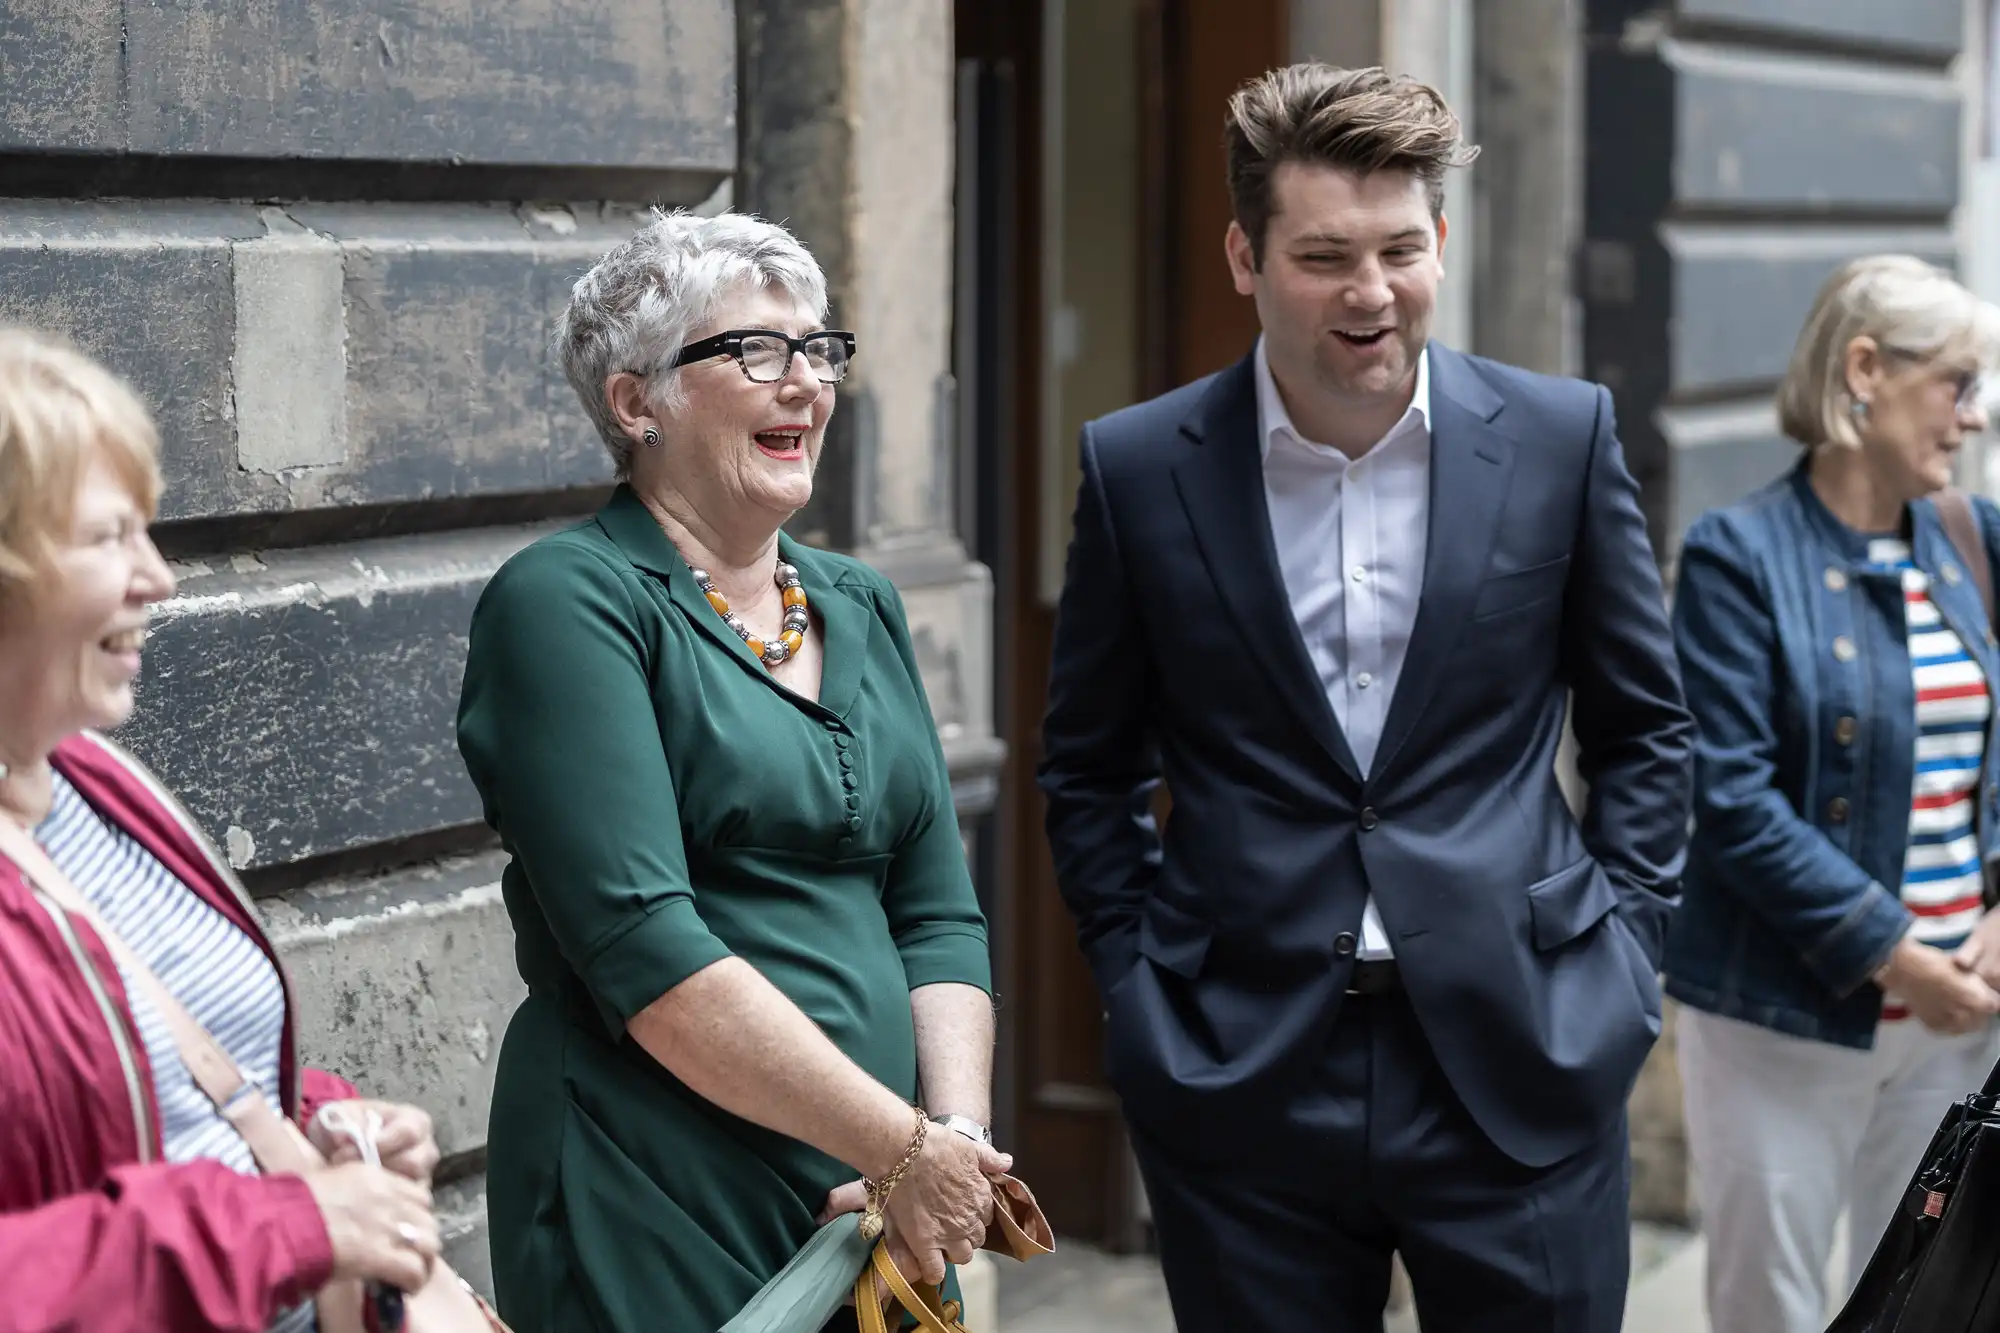 An older woman in a green dress laughs joyfully next to a young man in a suit, both standing on a city street.